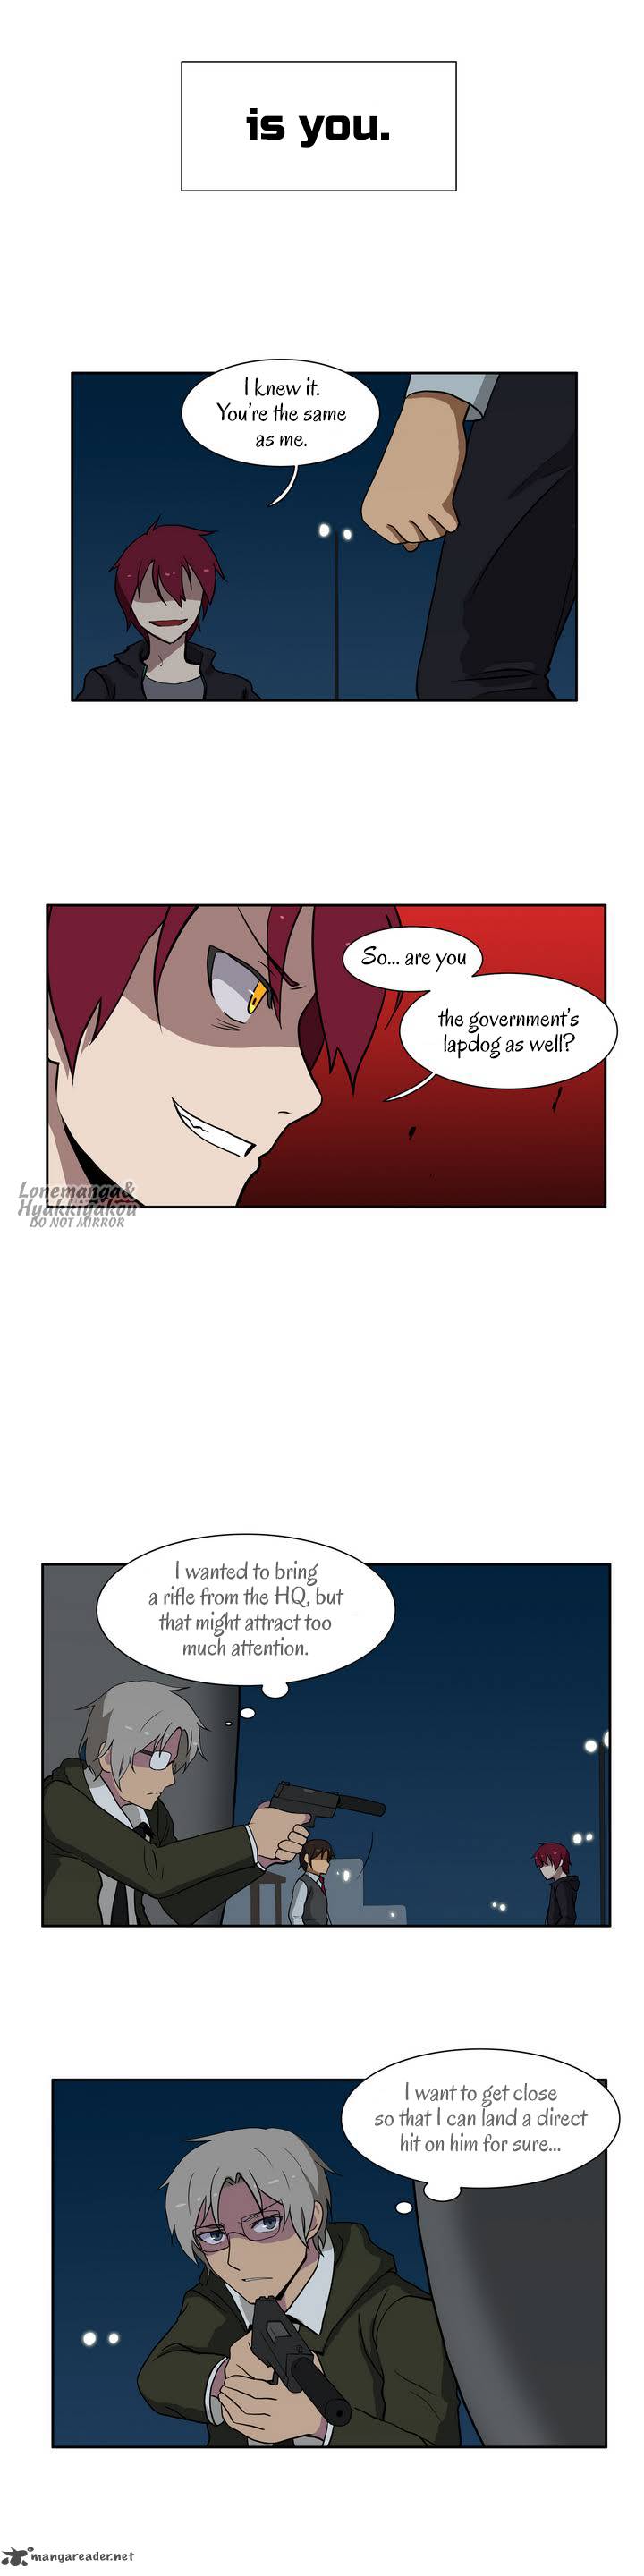 Hero Waltz Chapter 10 Page 5